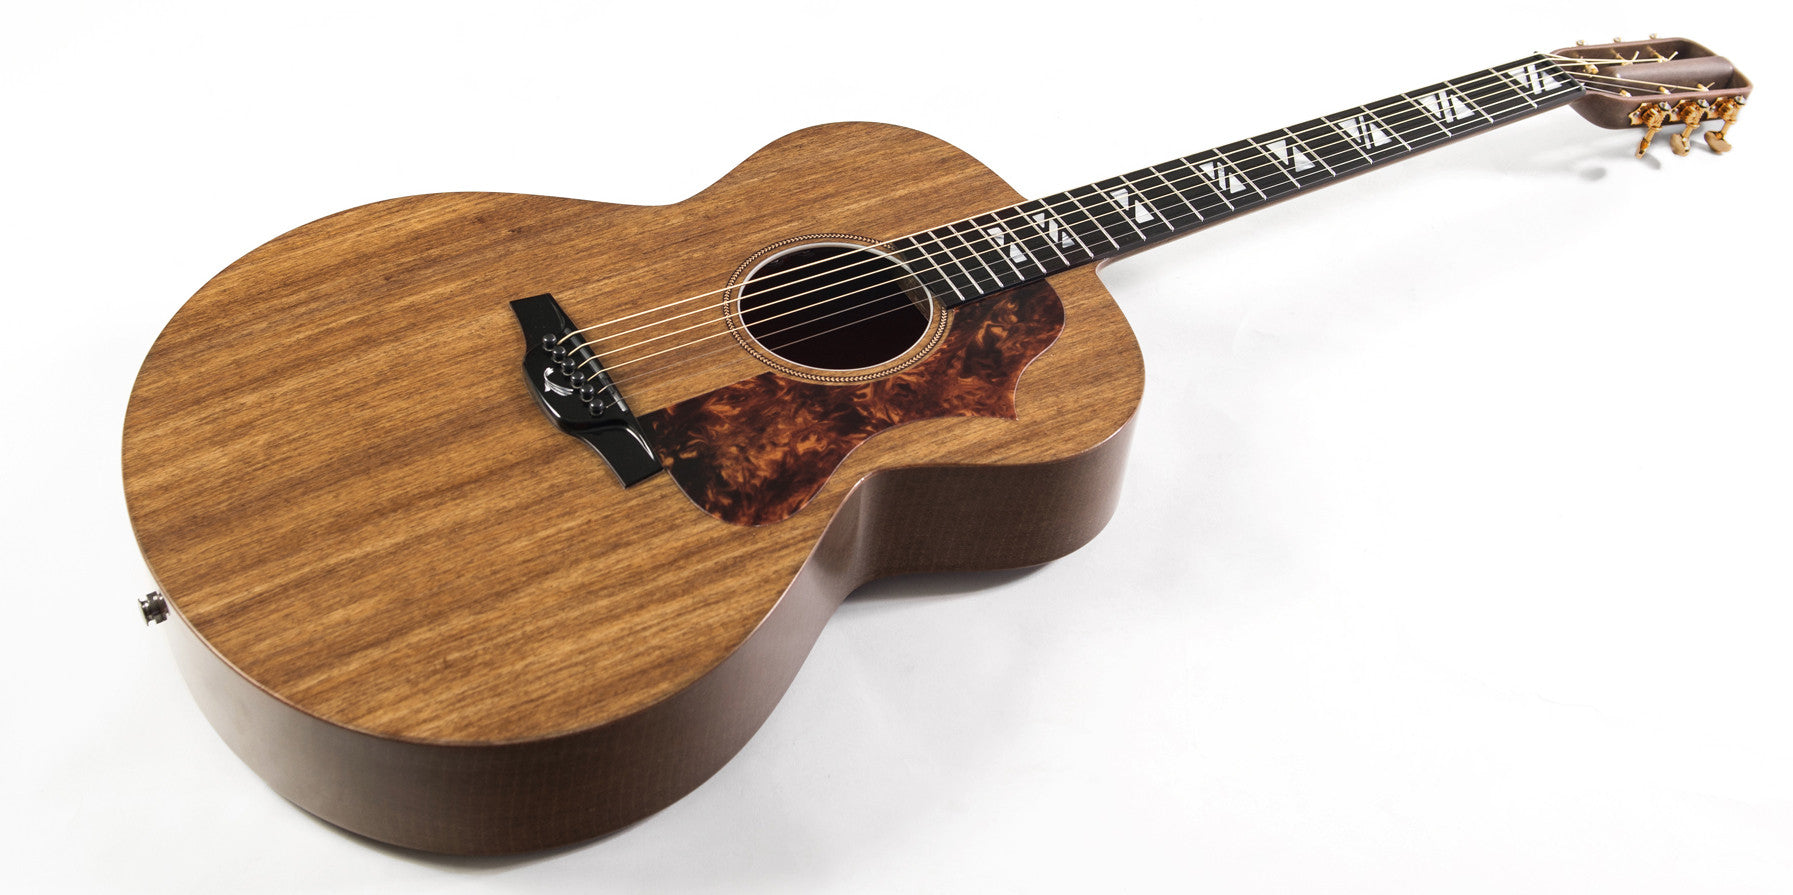 Wired.com article: $3,000 Guitar Made of ‘Solid Linen’ Looks and Plays Like Wood